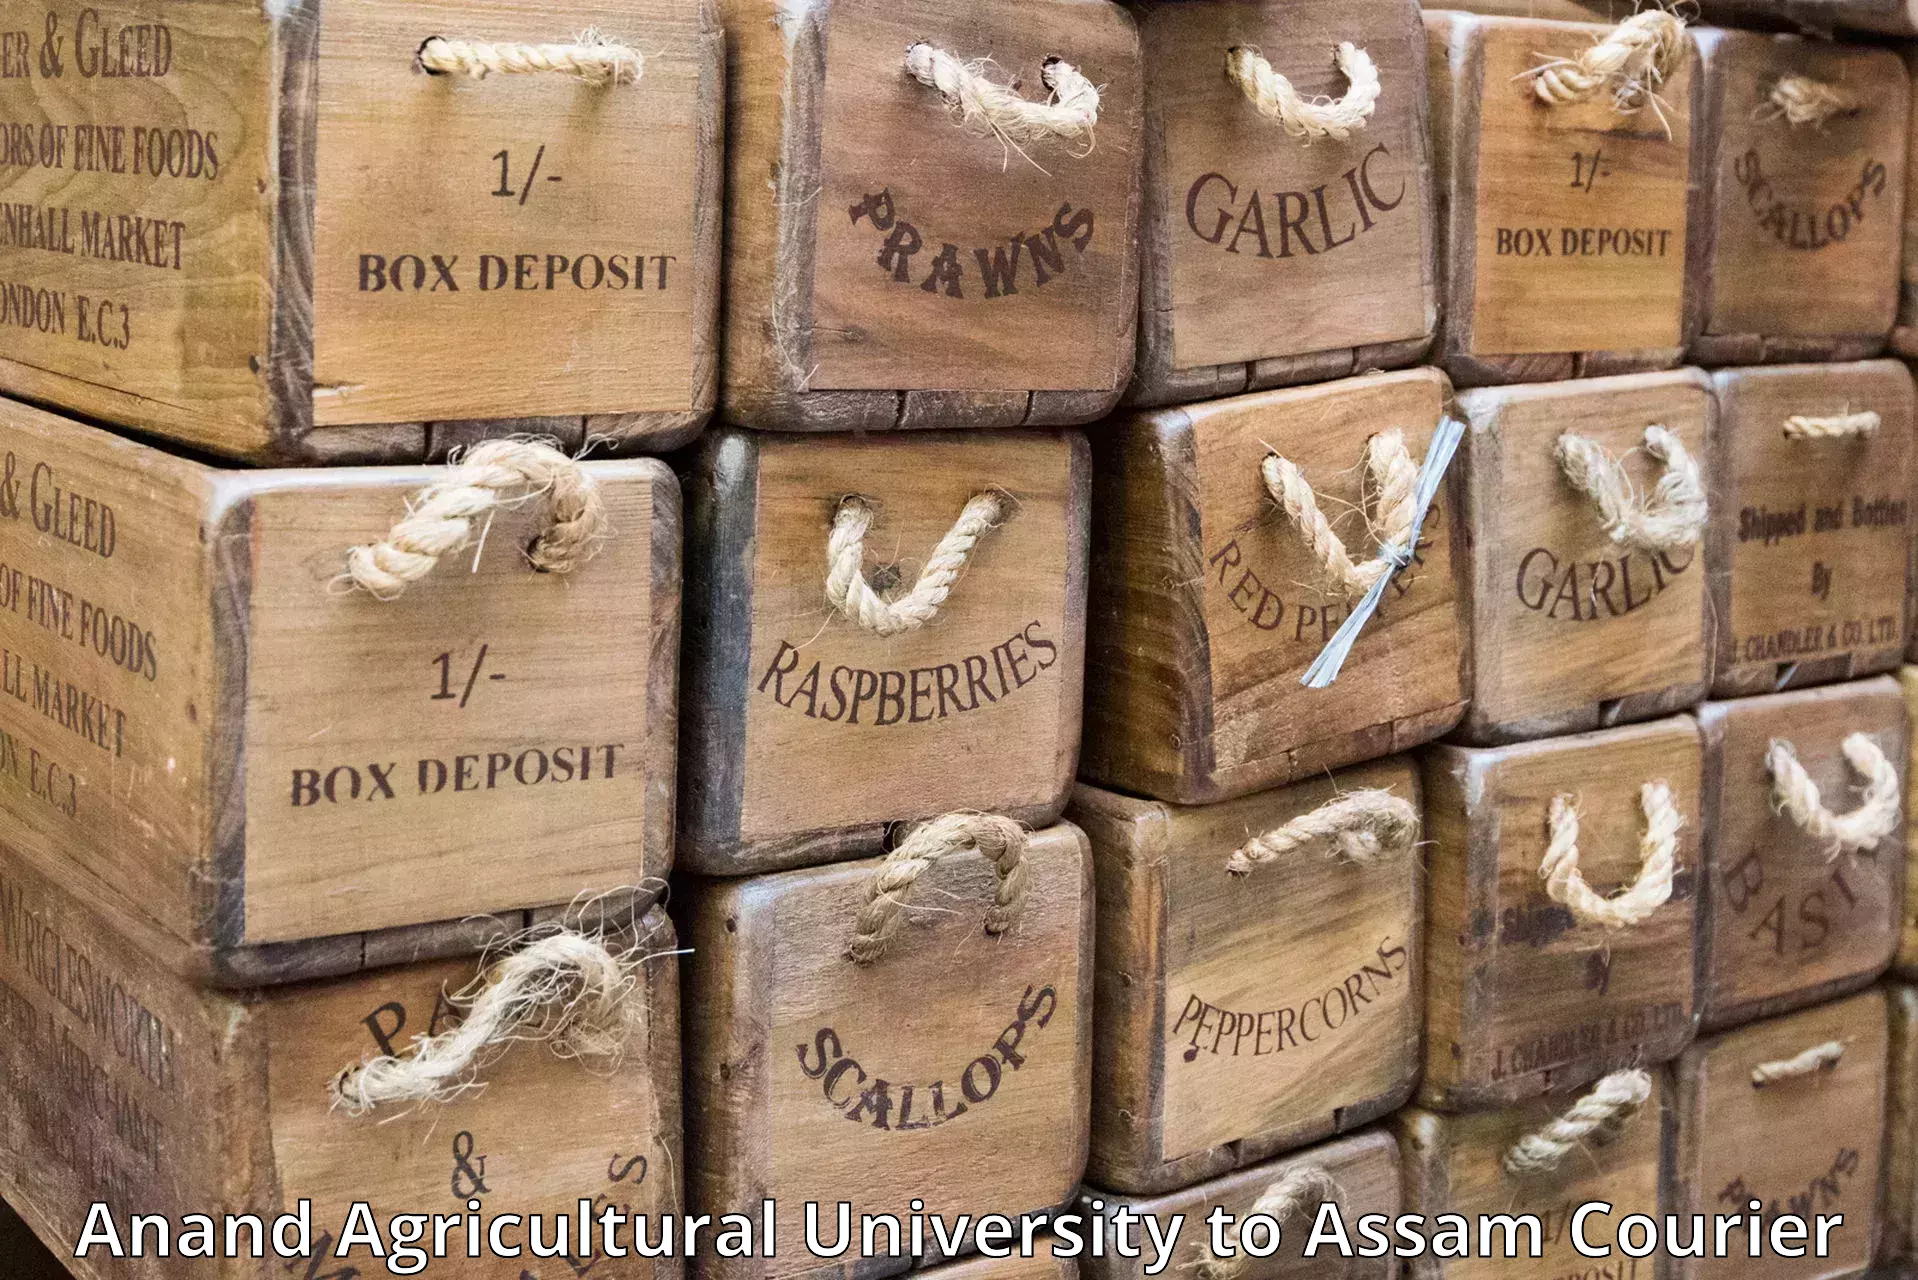 Cross-border shipping Anand Agricultural University to Karbi Anglong